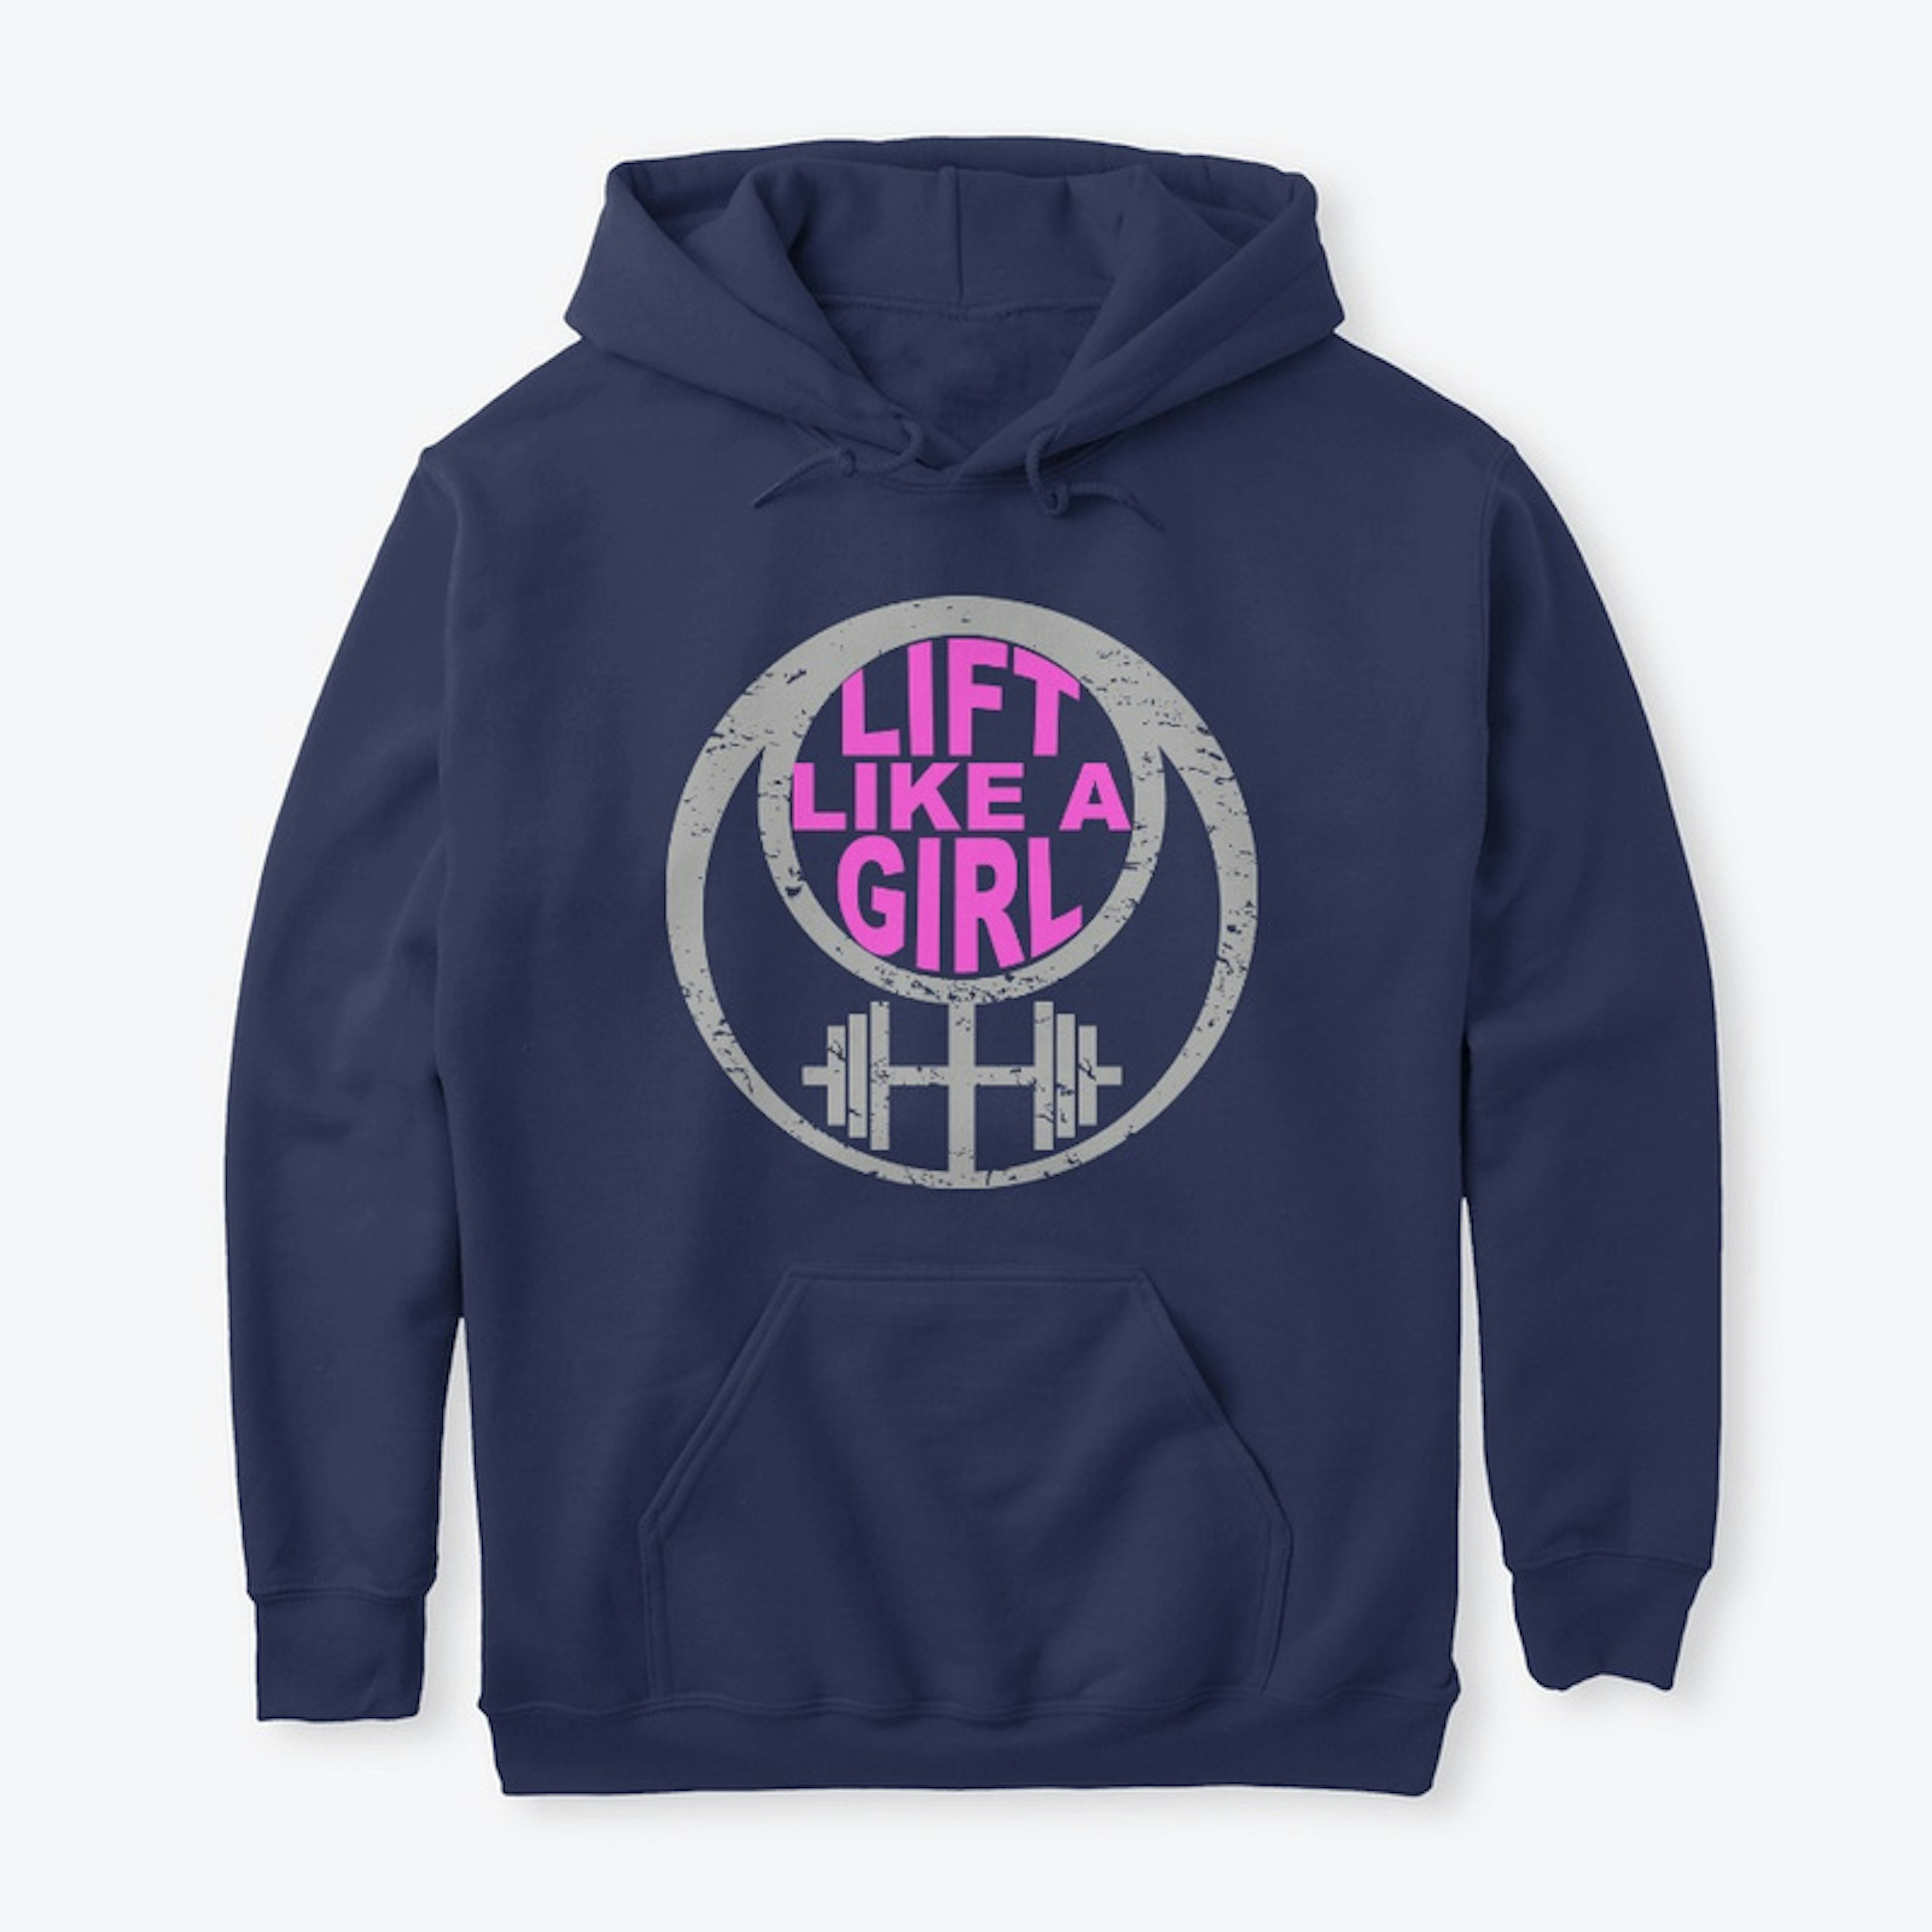 Lift Like a Girl Grey and Pink Logo